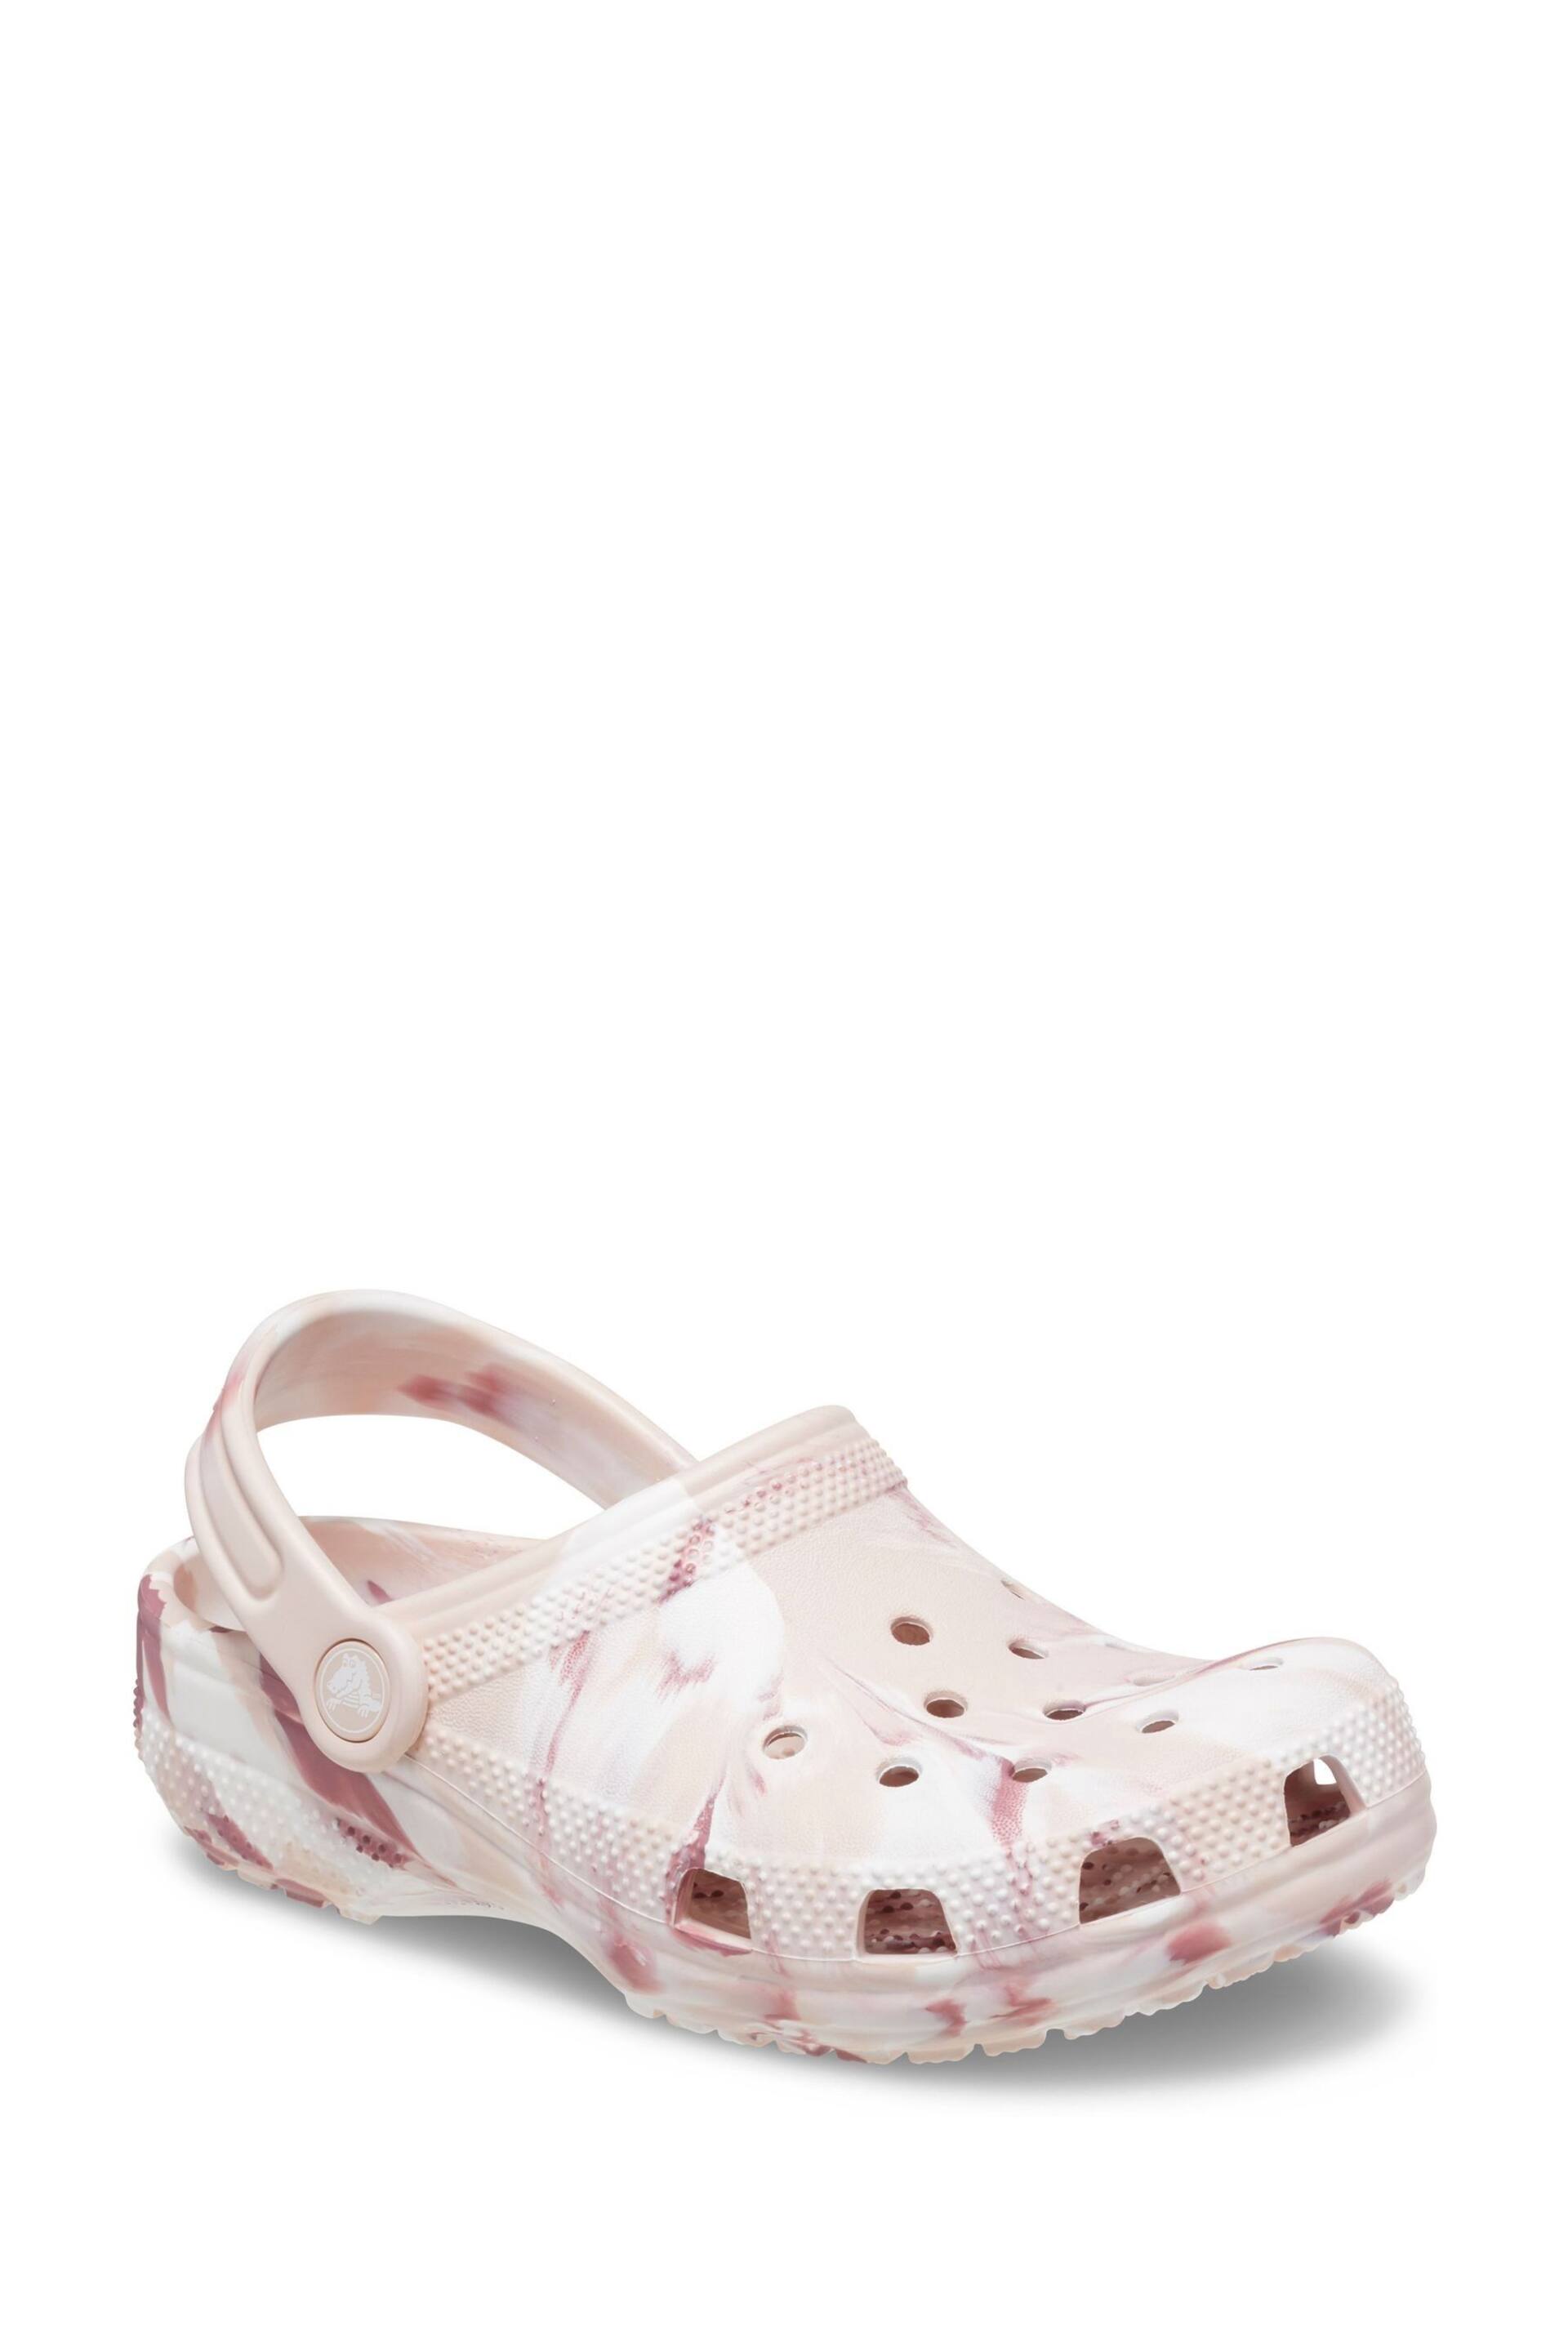 Crocs Classic Kids Marbled Clogs - Image 11 of 13